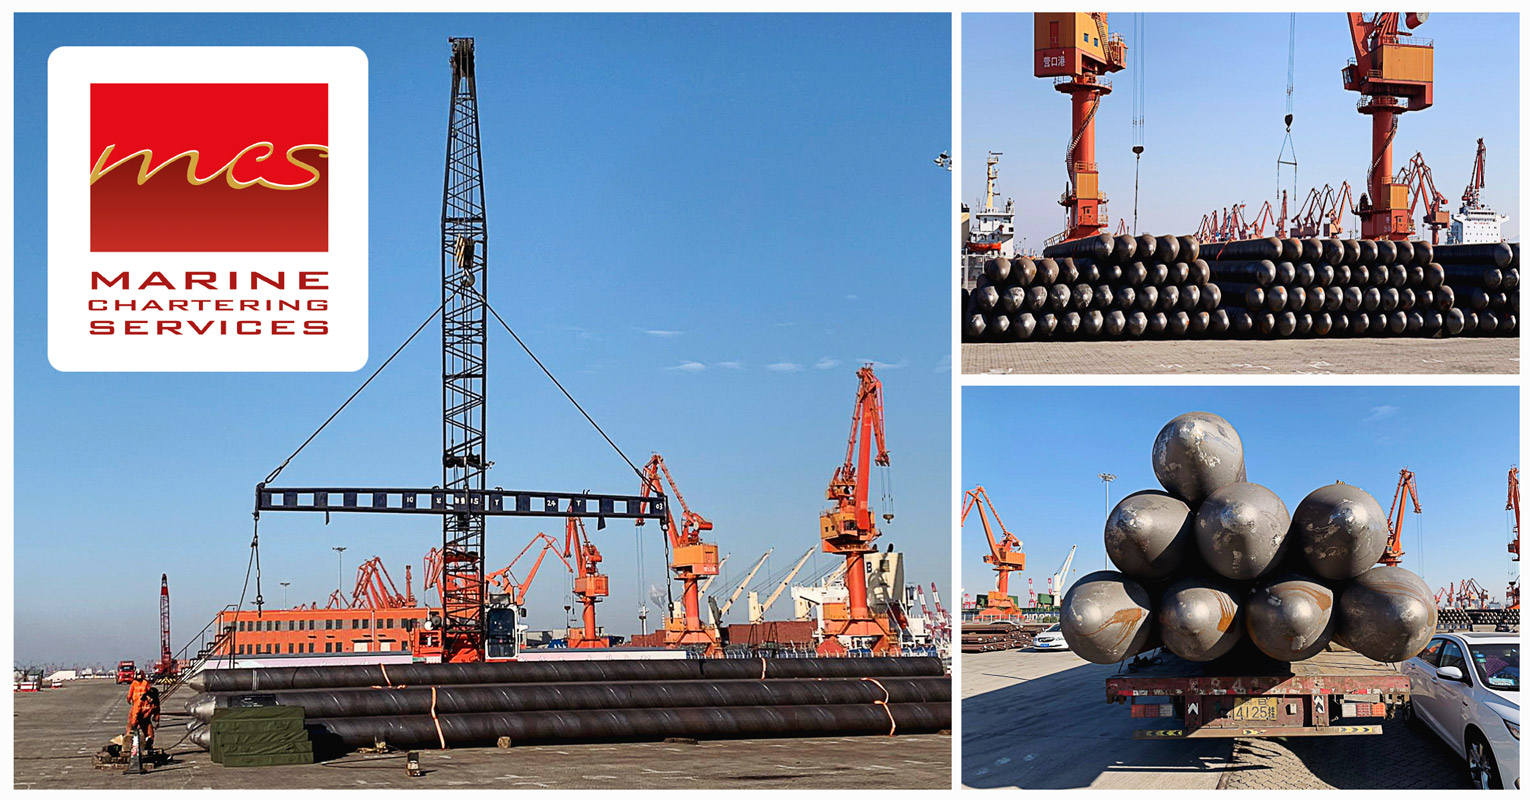 Marine Chartering Services Shipped 20m Long Pipes